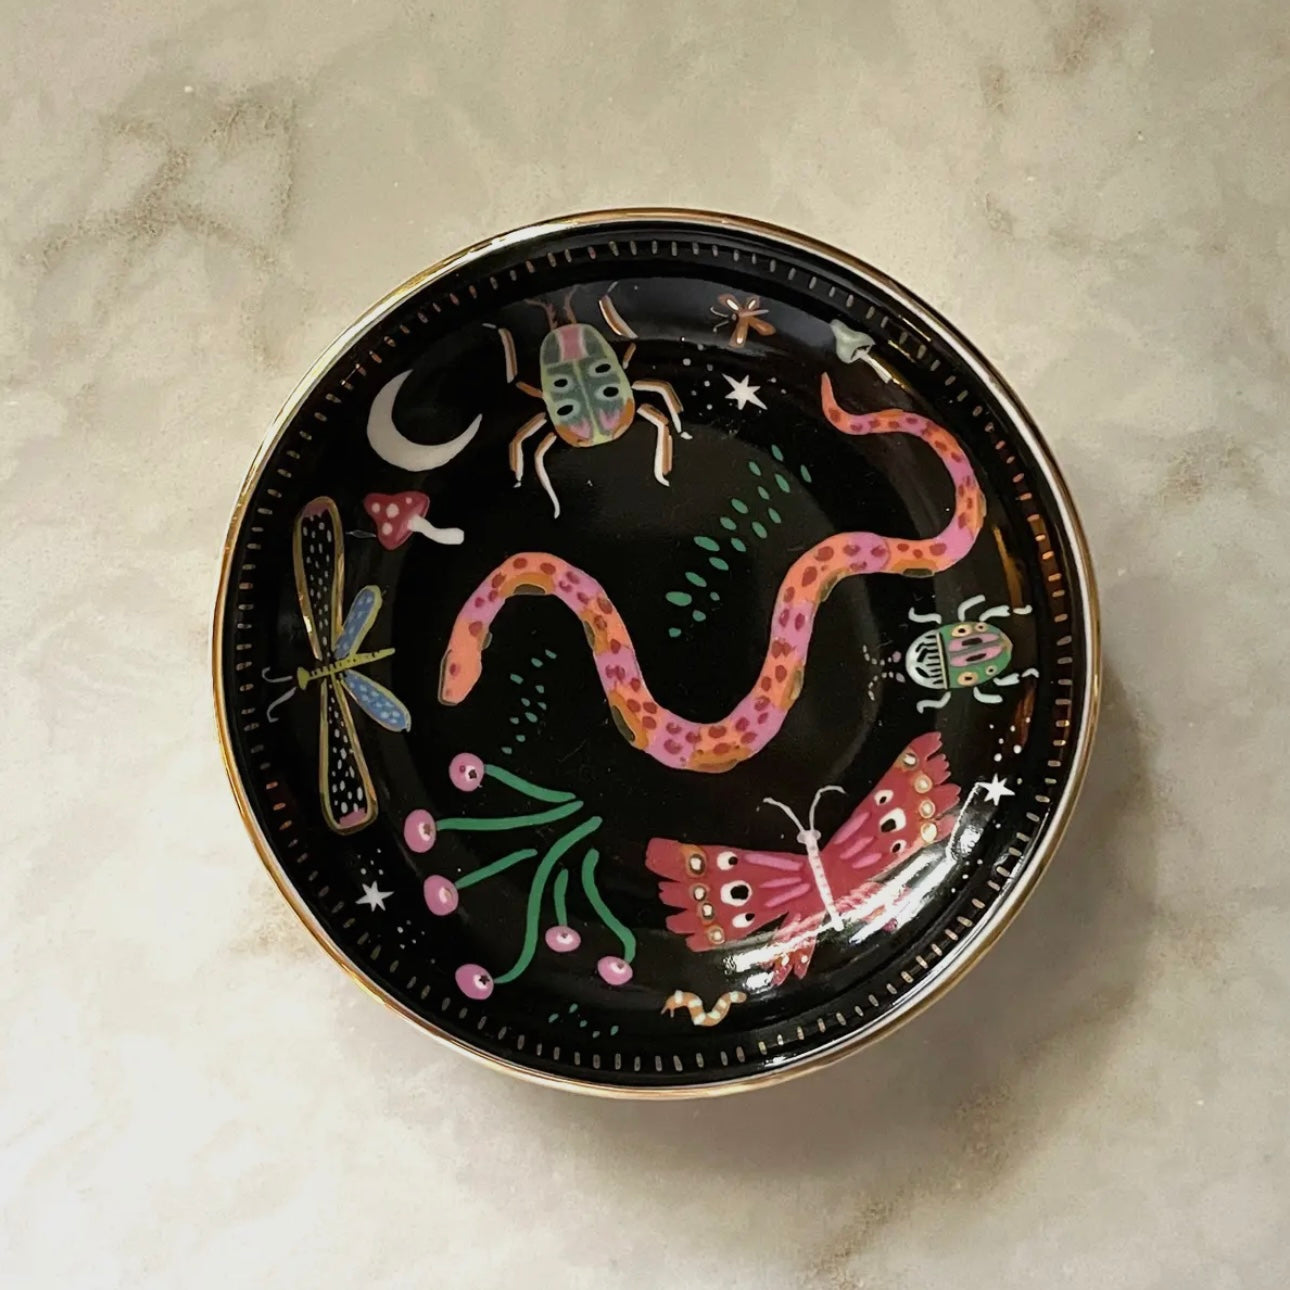 White ceramic Midnight Garden Trinket Dish with colorful hand-painted designs and gold edges